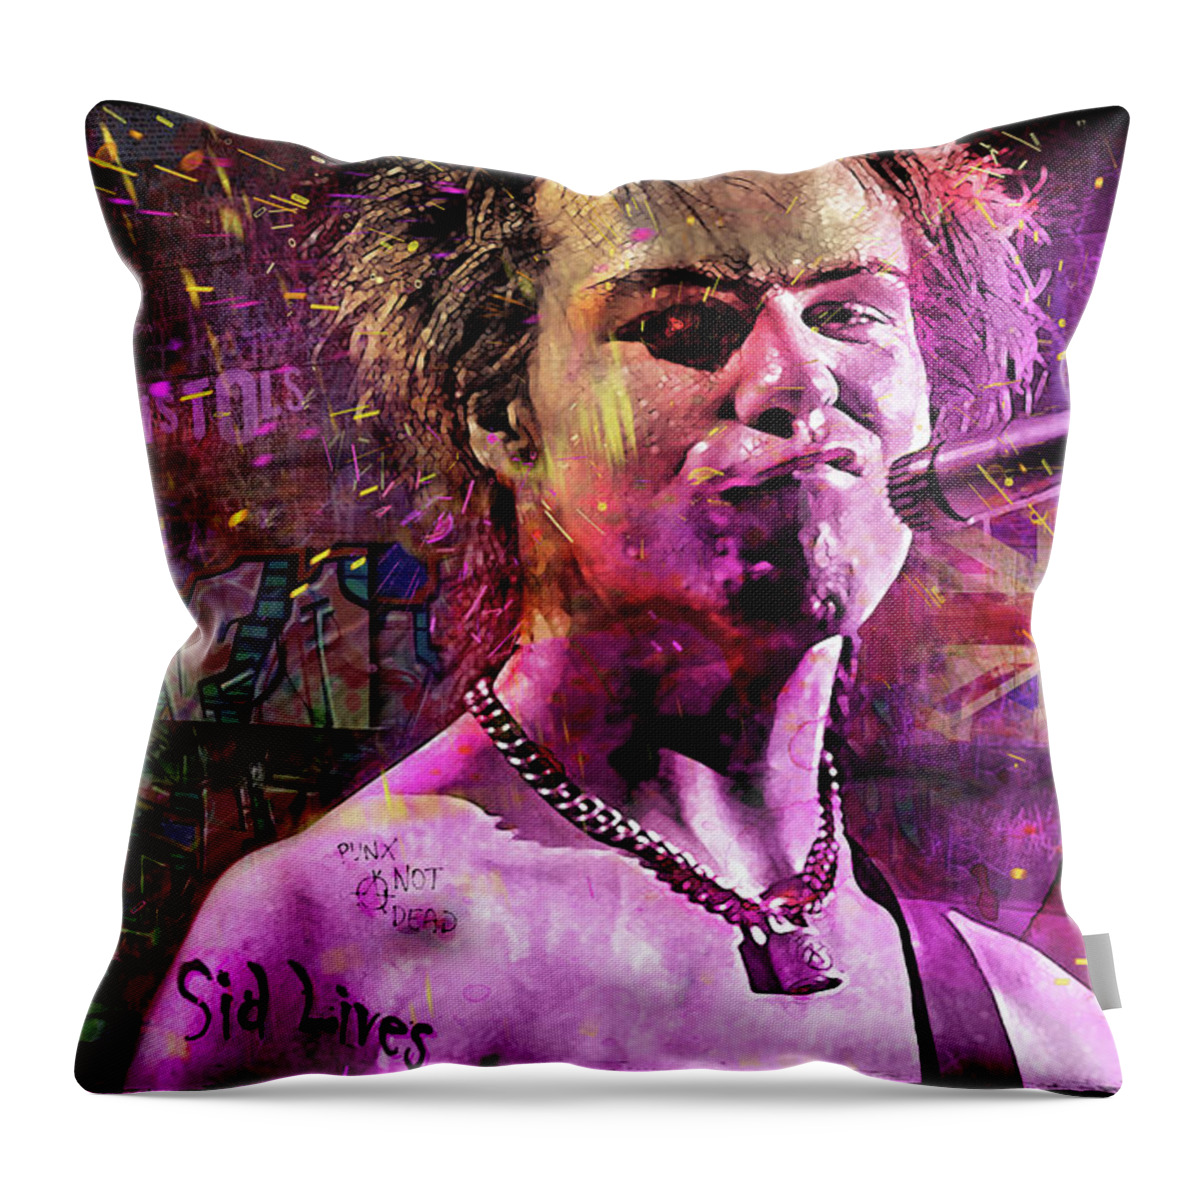 Sid Vicious Throw Pillow featuring the digital art Sid Lives by Mal Bray